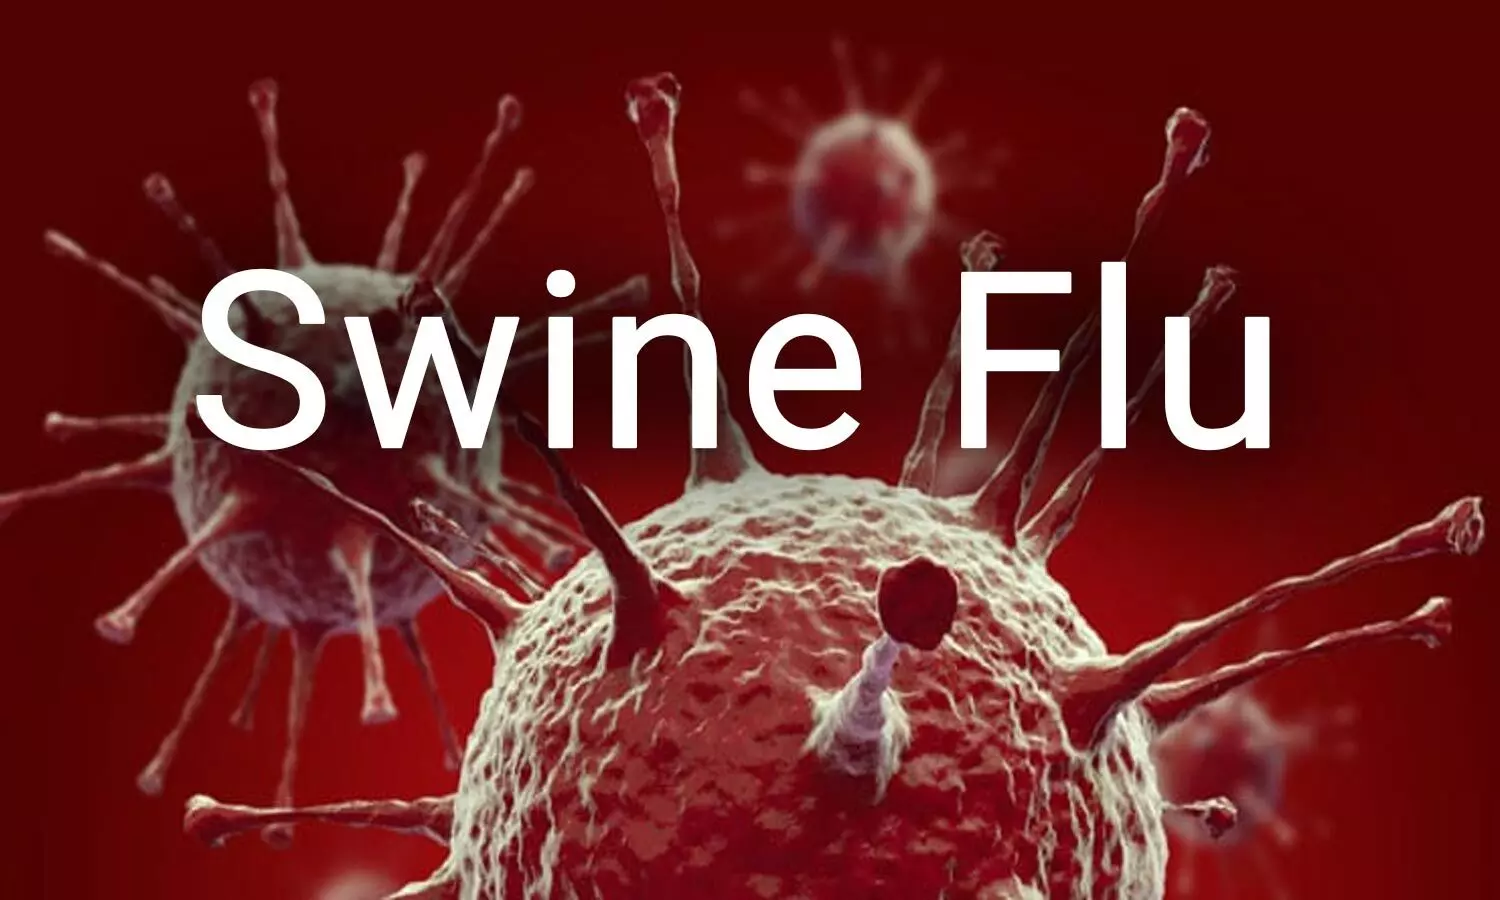 81 patients including 20 PAC personnel tested positive for swine flu in Meerut: Chief Medical Officer